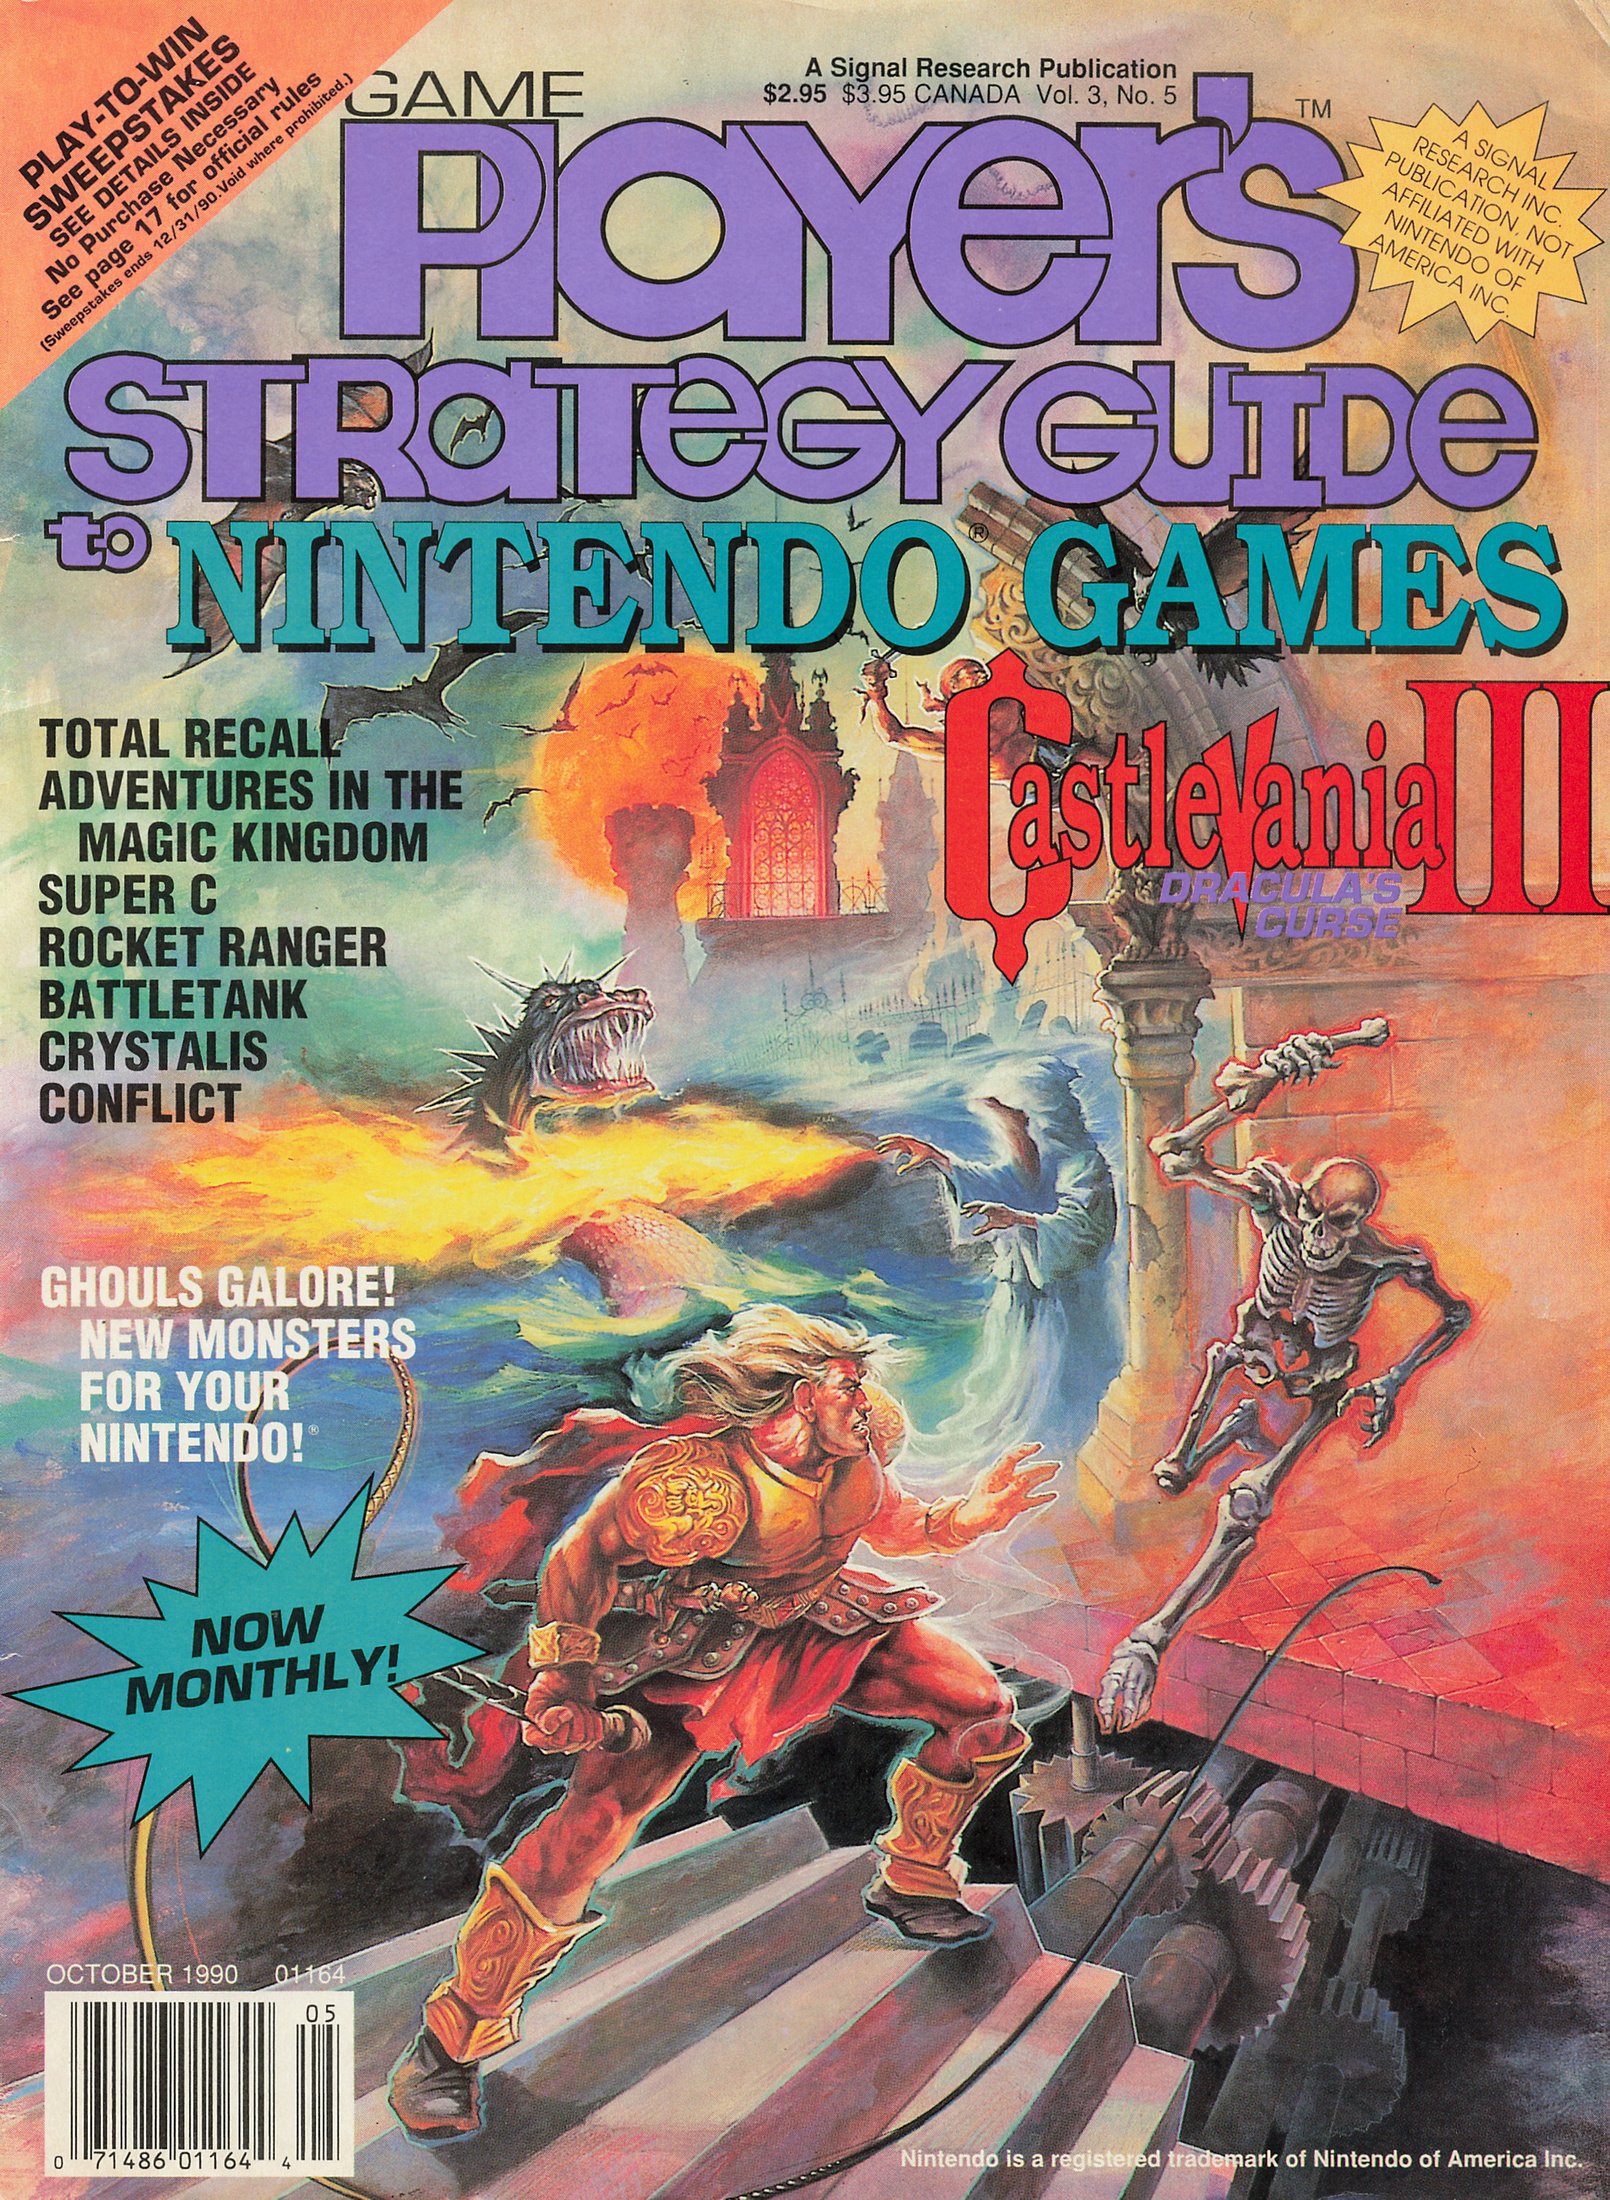 Game Player's Strategy Guide to Nintendo Games Vol. 3 No. 5 (October 1990)